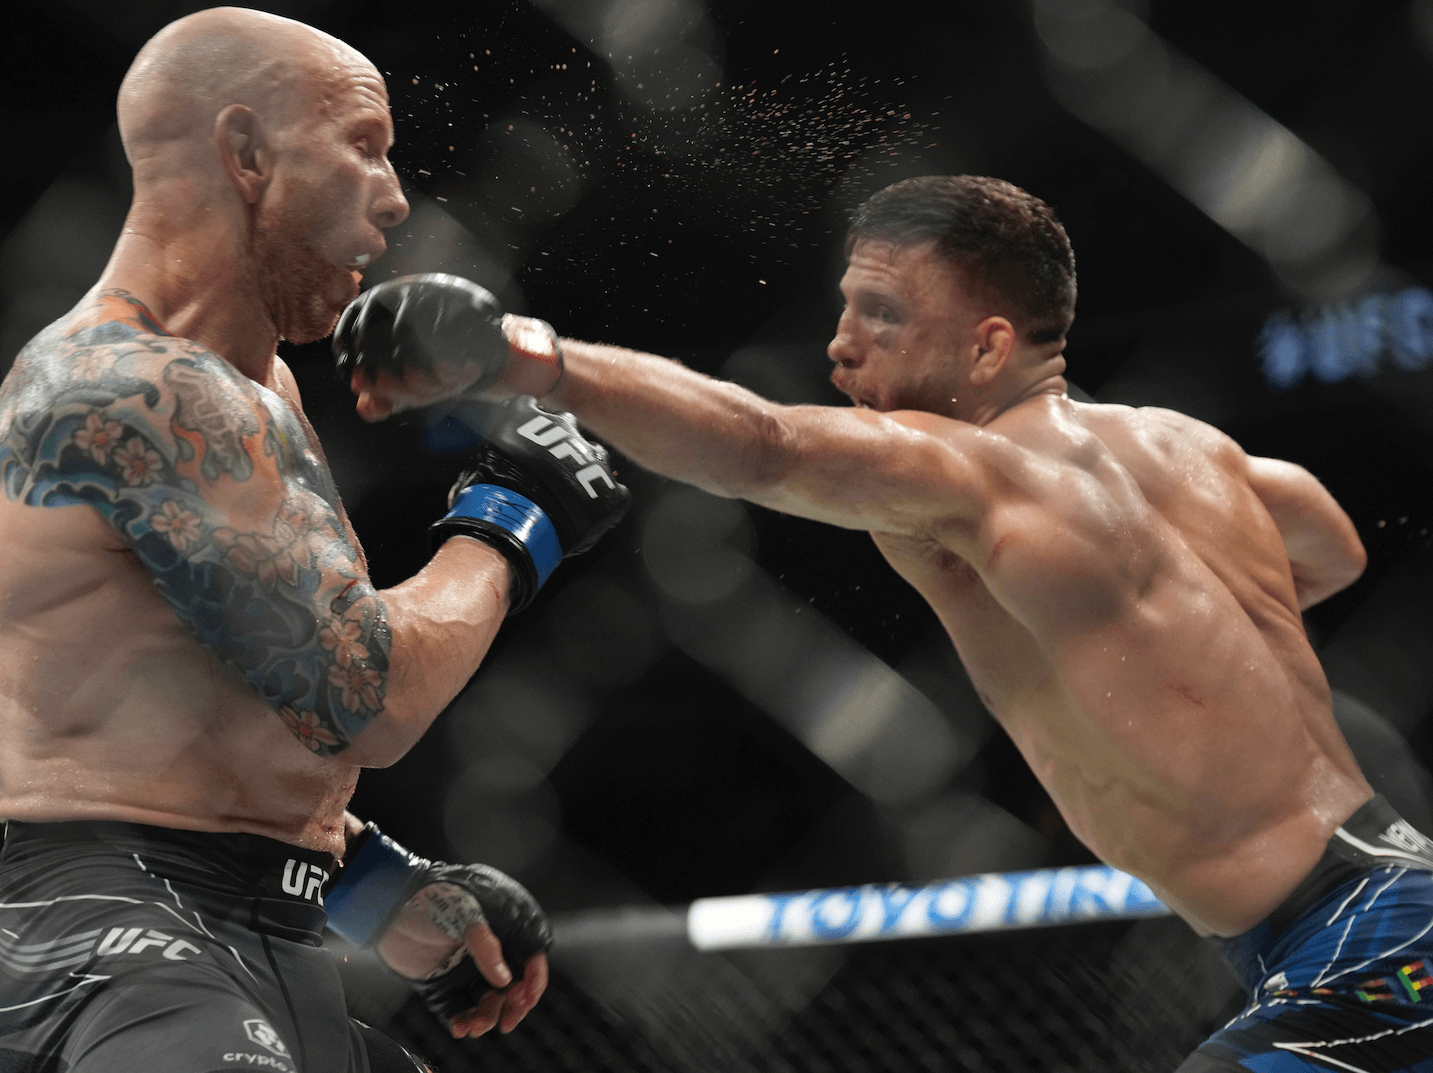 Ufc Fight Night Livestream How To Watch Mma Online For Free 